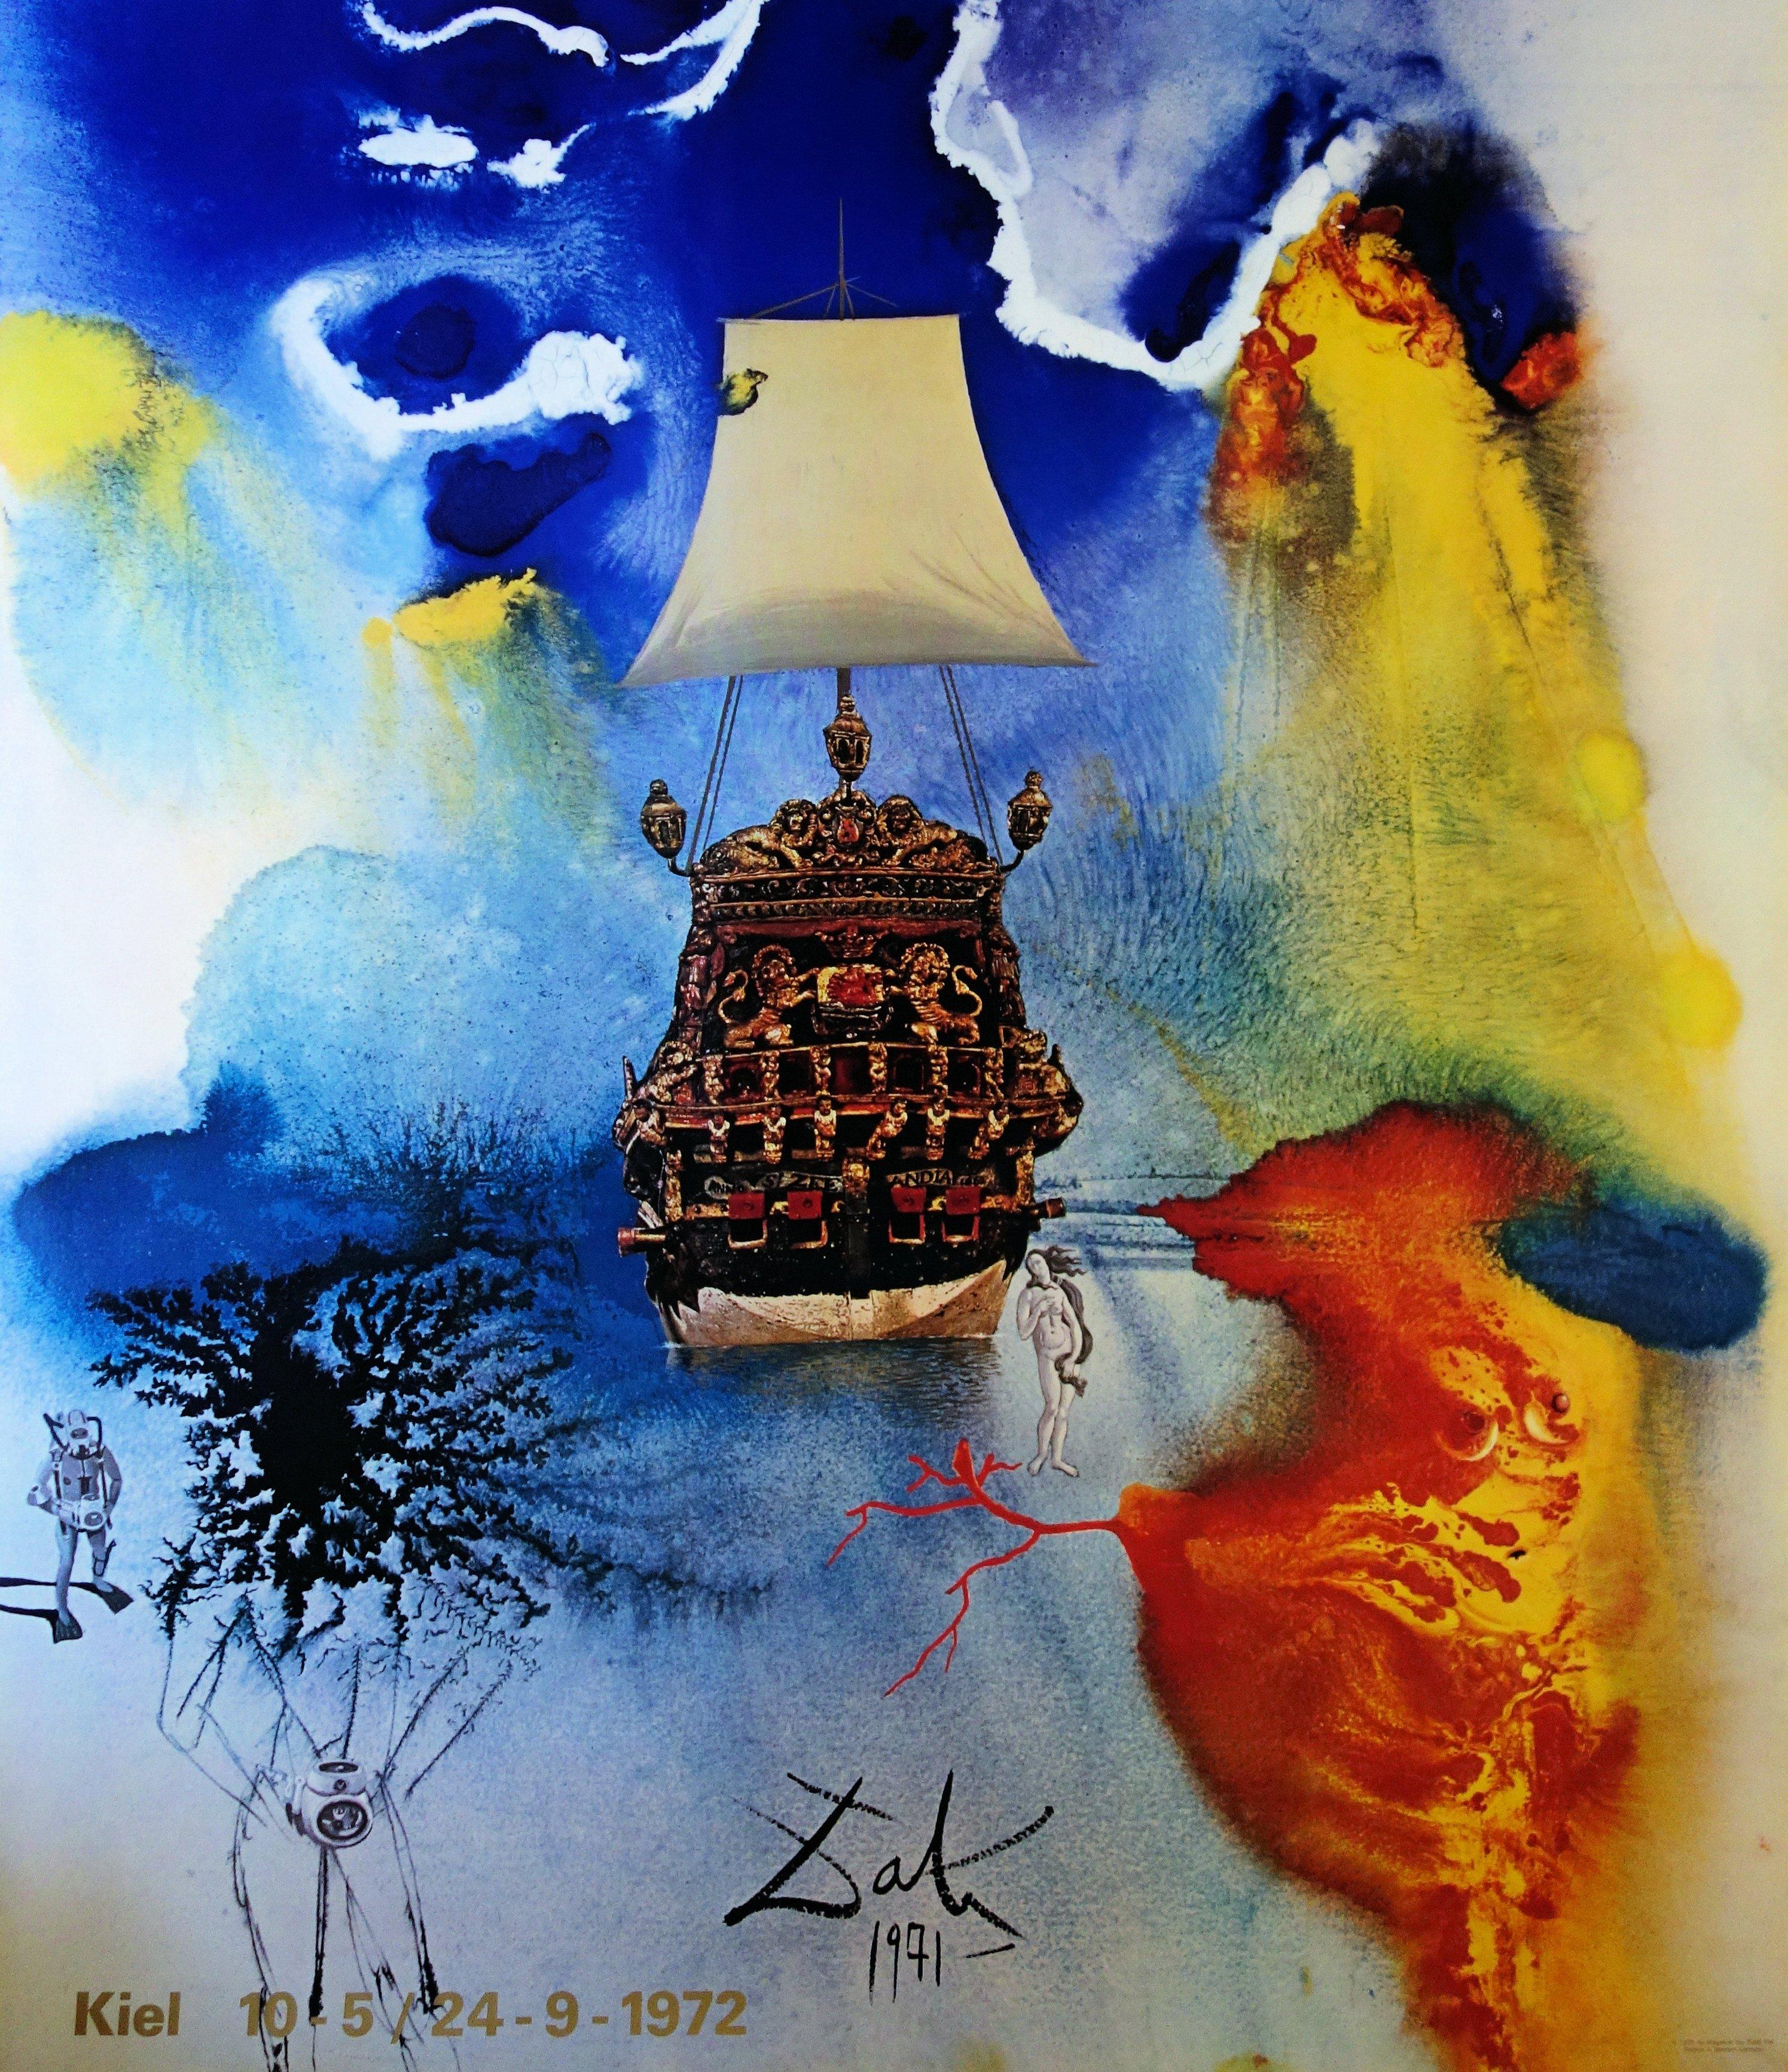 Man and Sea - Vintage exhibition poster - 1972 - Print by (after) Salvador Dali